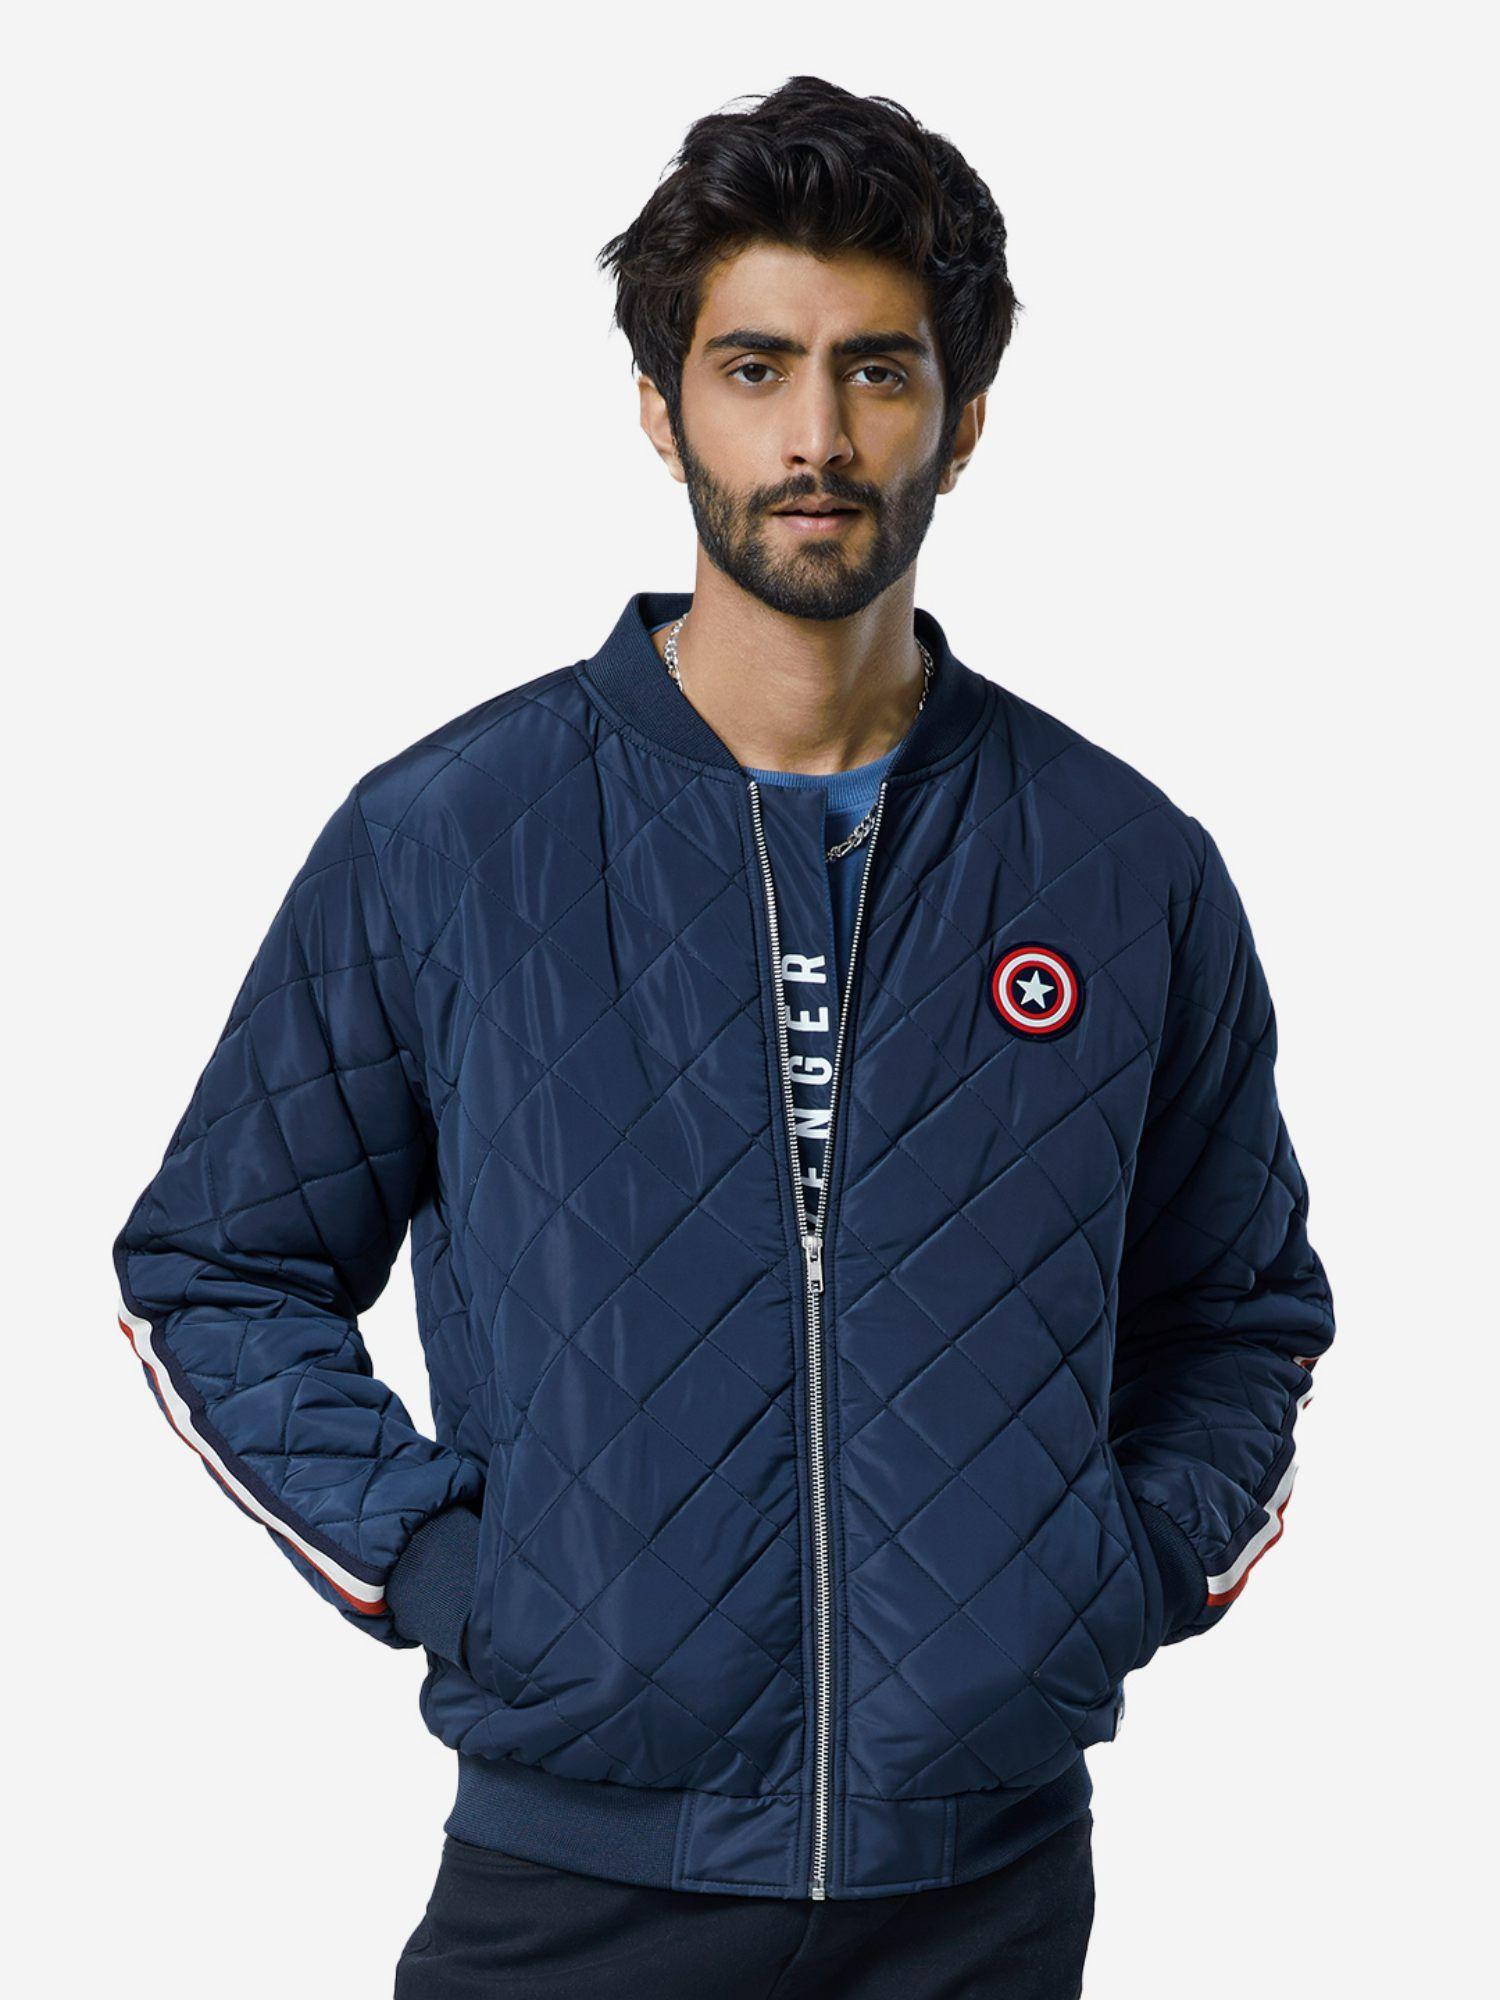 official-captain-america-shield-puffer-jackets-for-men